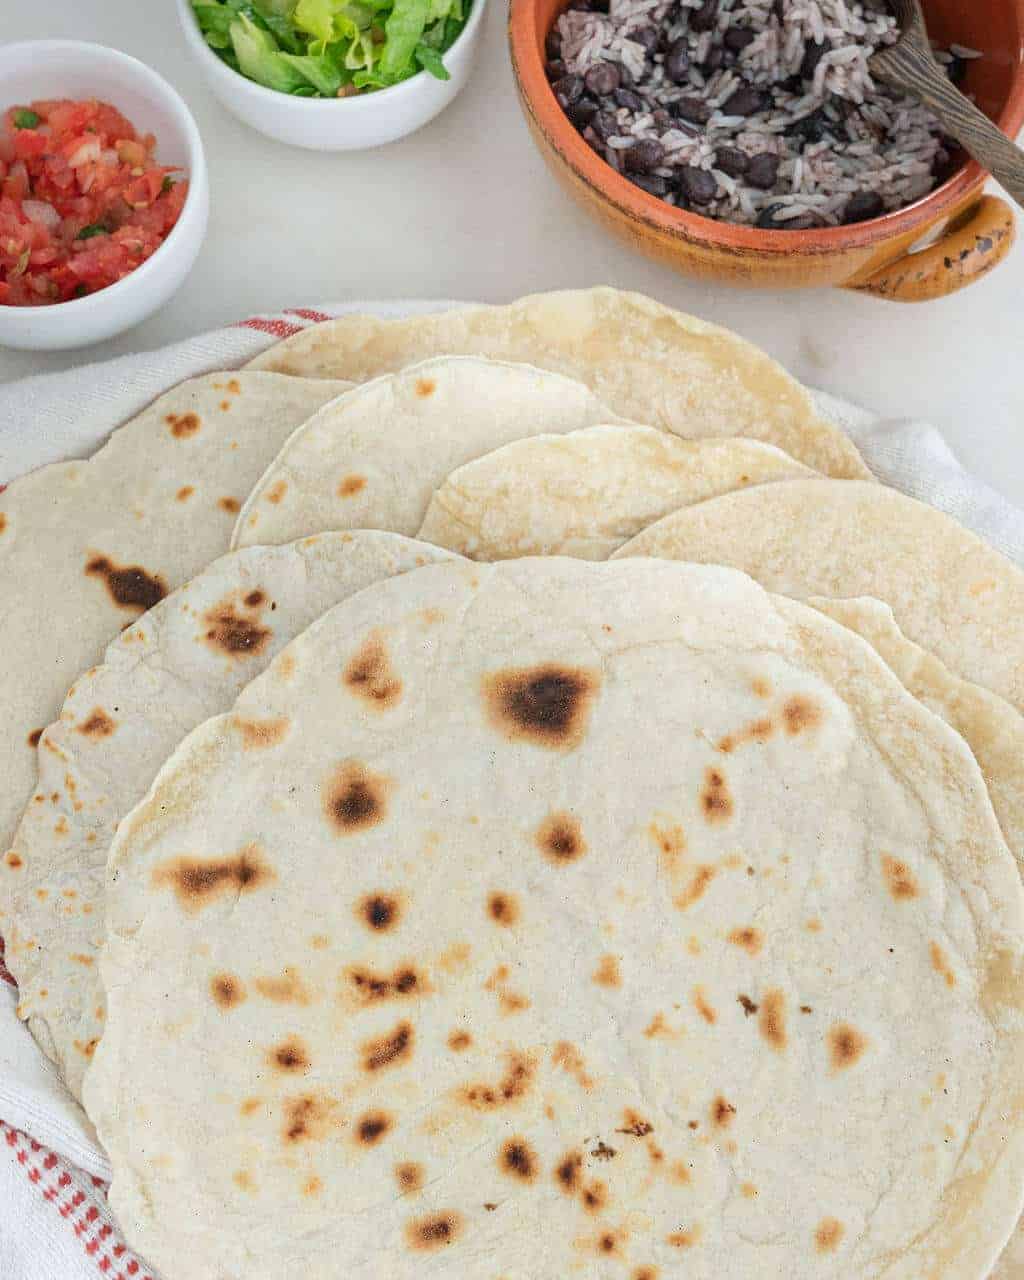 Handmade flour tortillas in a stack on a white towel.